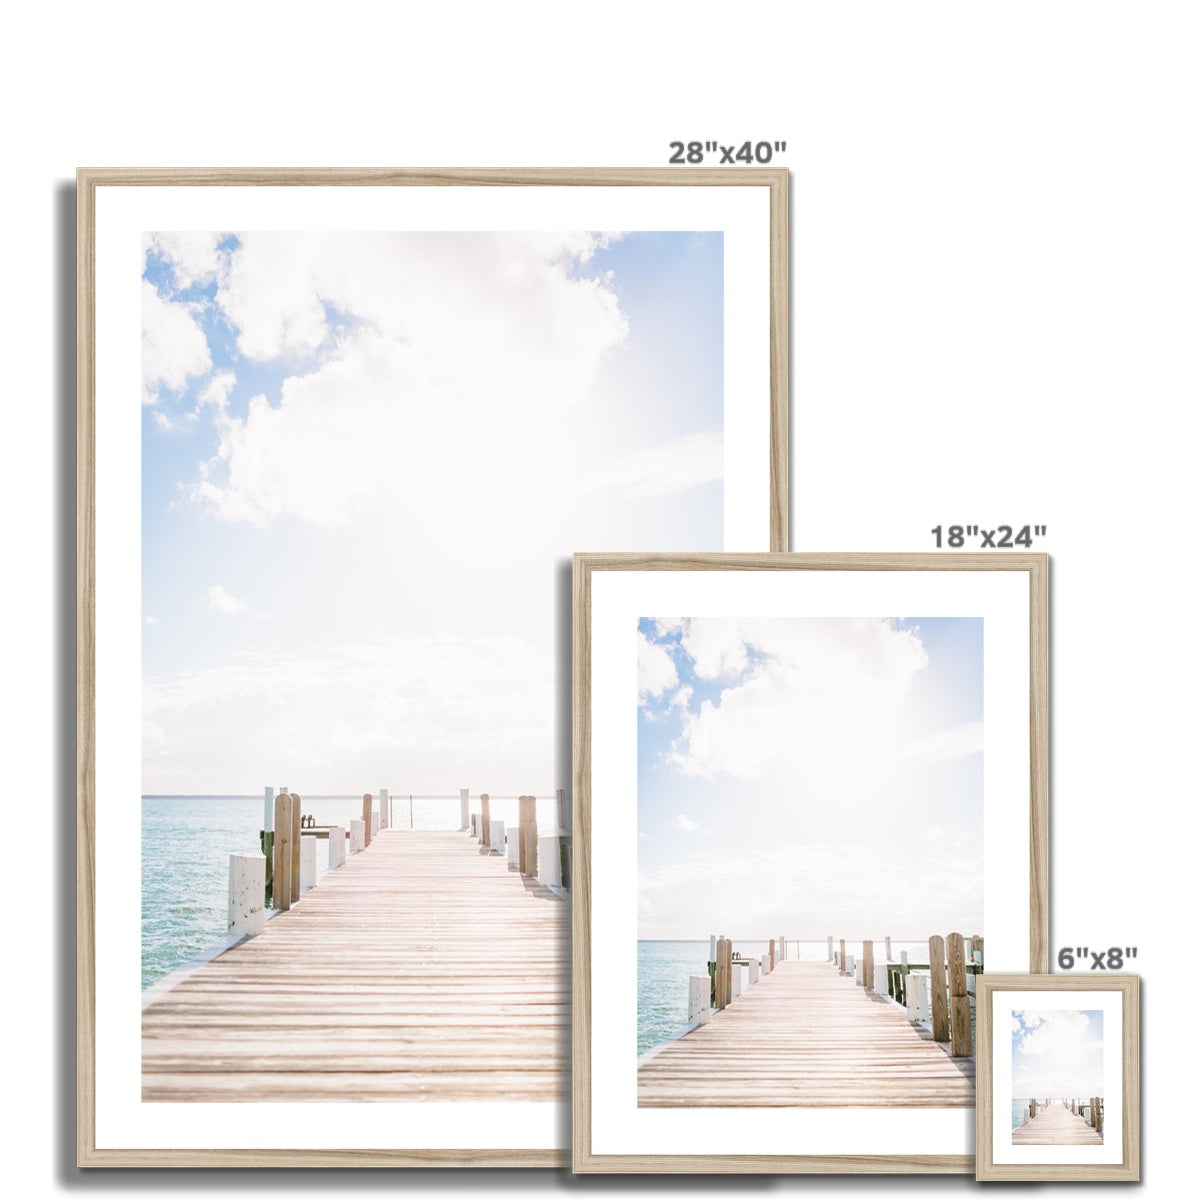 GREEN TURTLE CAY DOCK Framed & Mounted Print